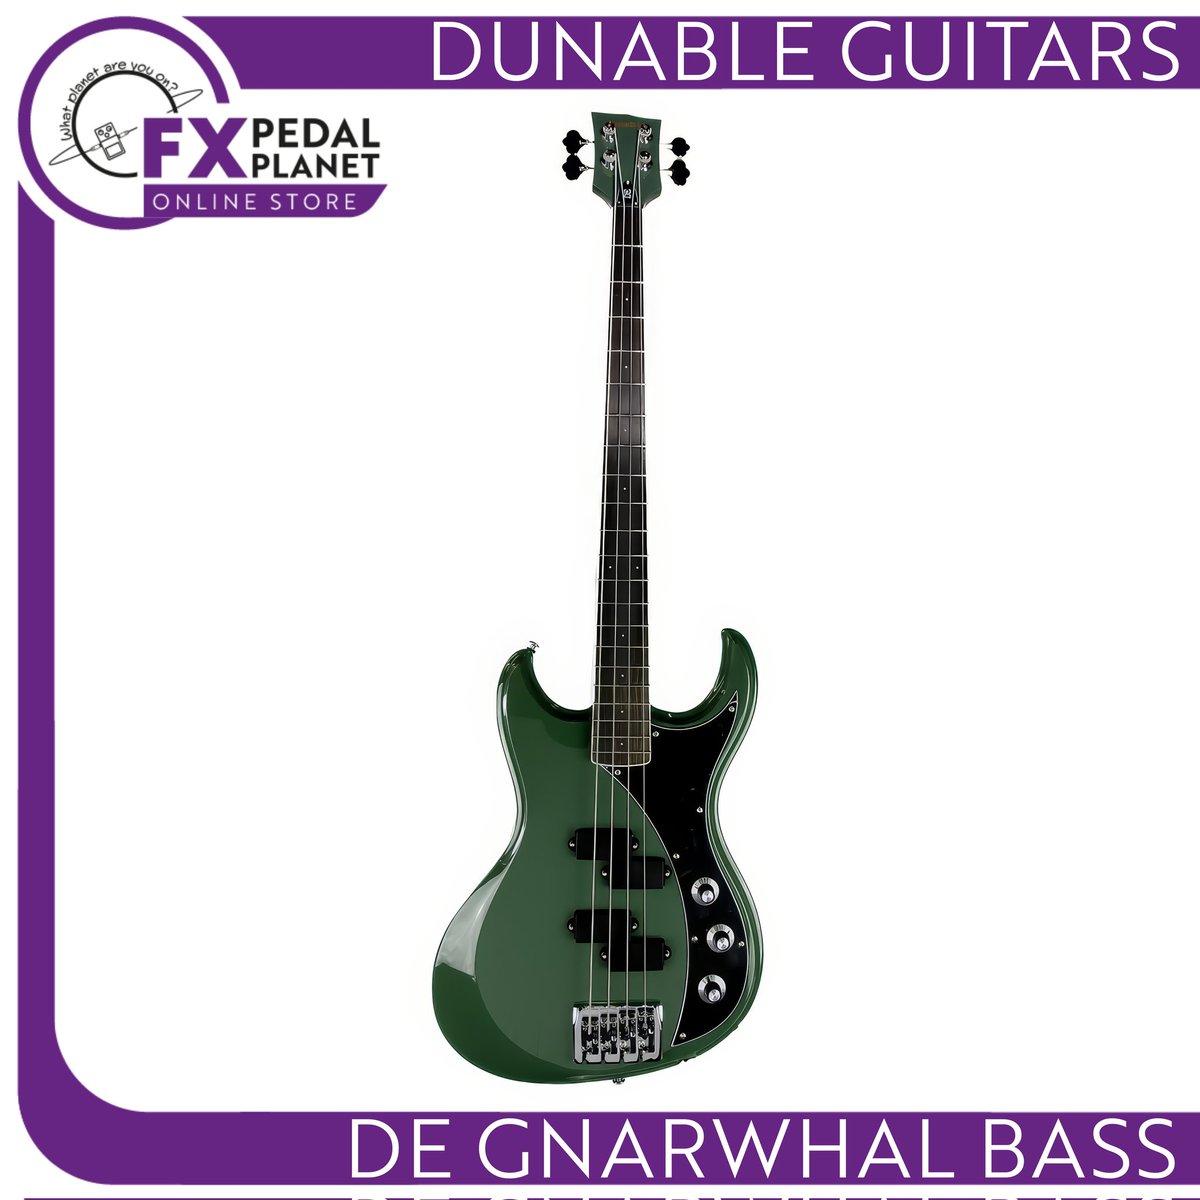 🌟🌟 NEW ARRIVAL 🌟🌟 The @de_gtrs Gnarwhal DE Bass: expertly crafted for musical brilliance. With versatile tones and comfy design, it guarantees a delightful play. Finished in Olive Green gloss, it's visually stunning and sonically superb. Available via our website.